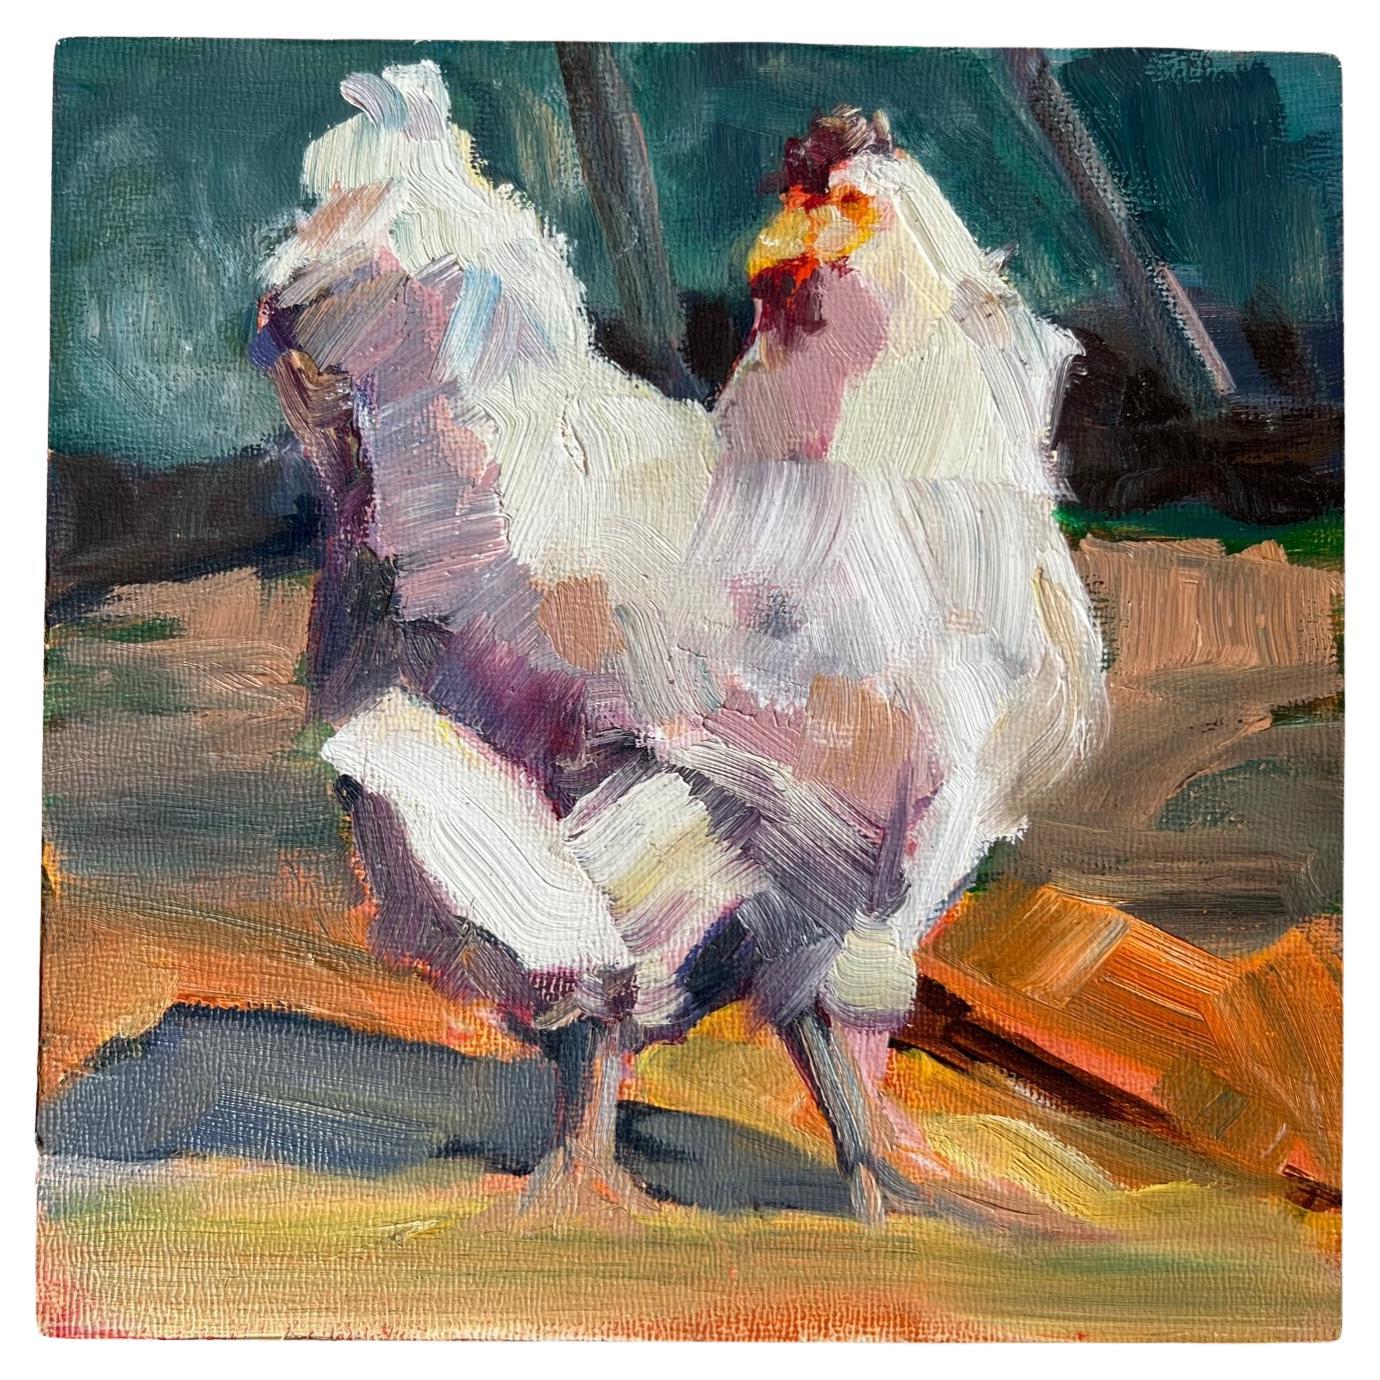 Small Figurative Hen Painting on Wood by Gen Zorich